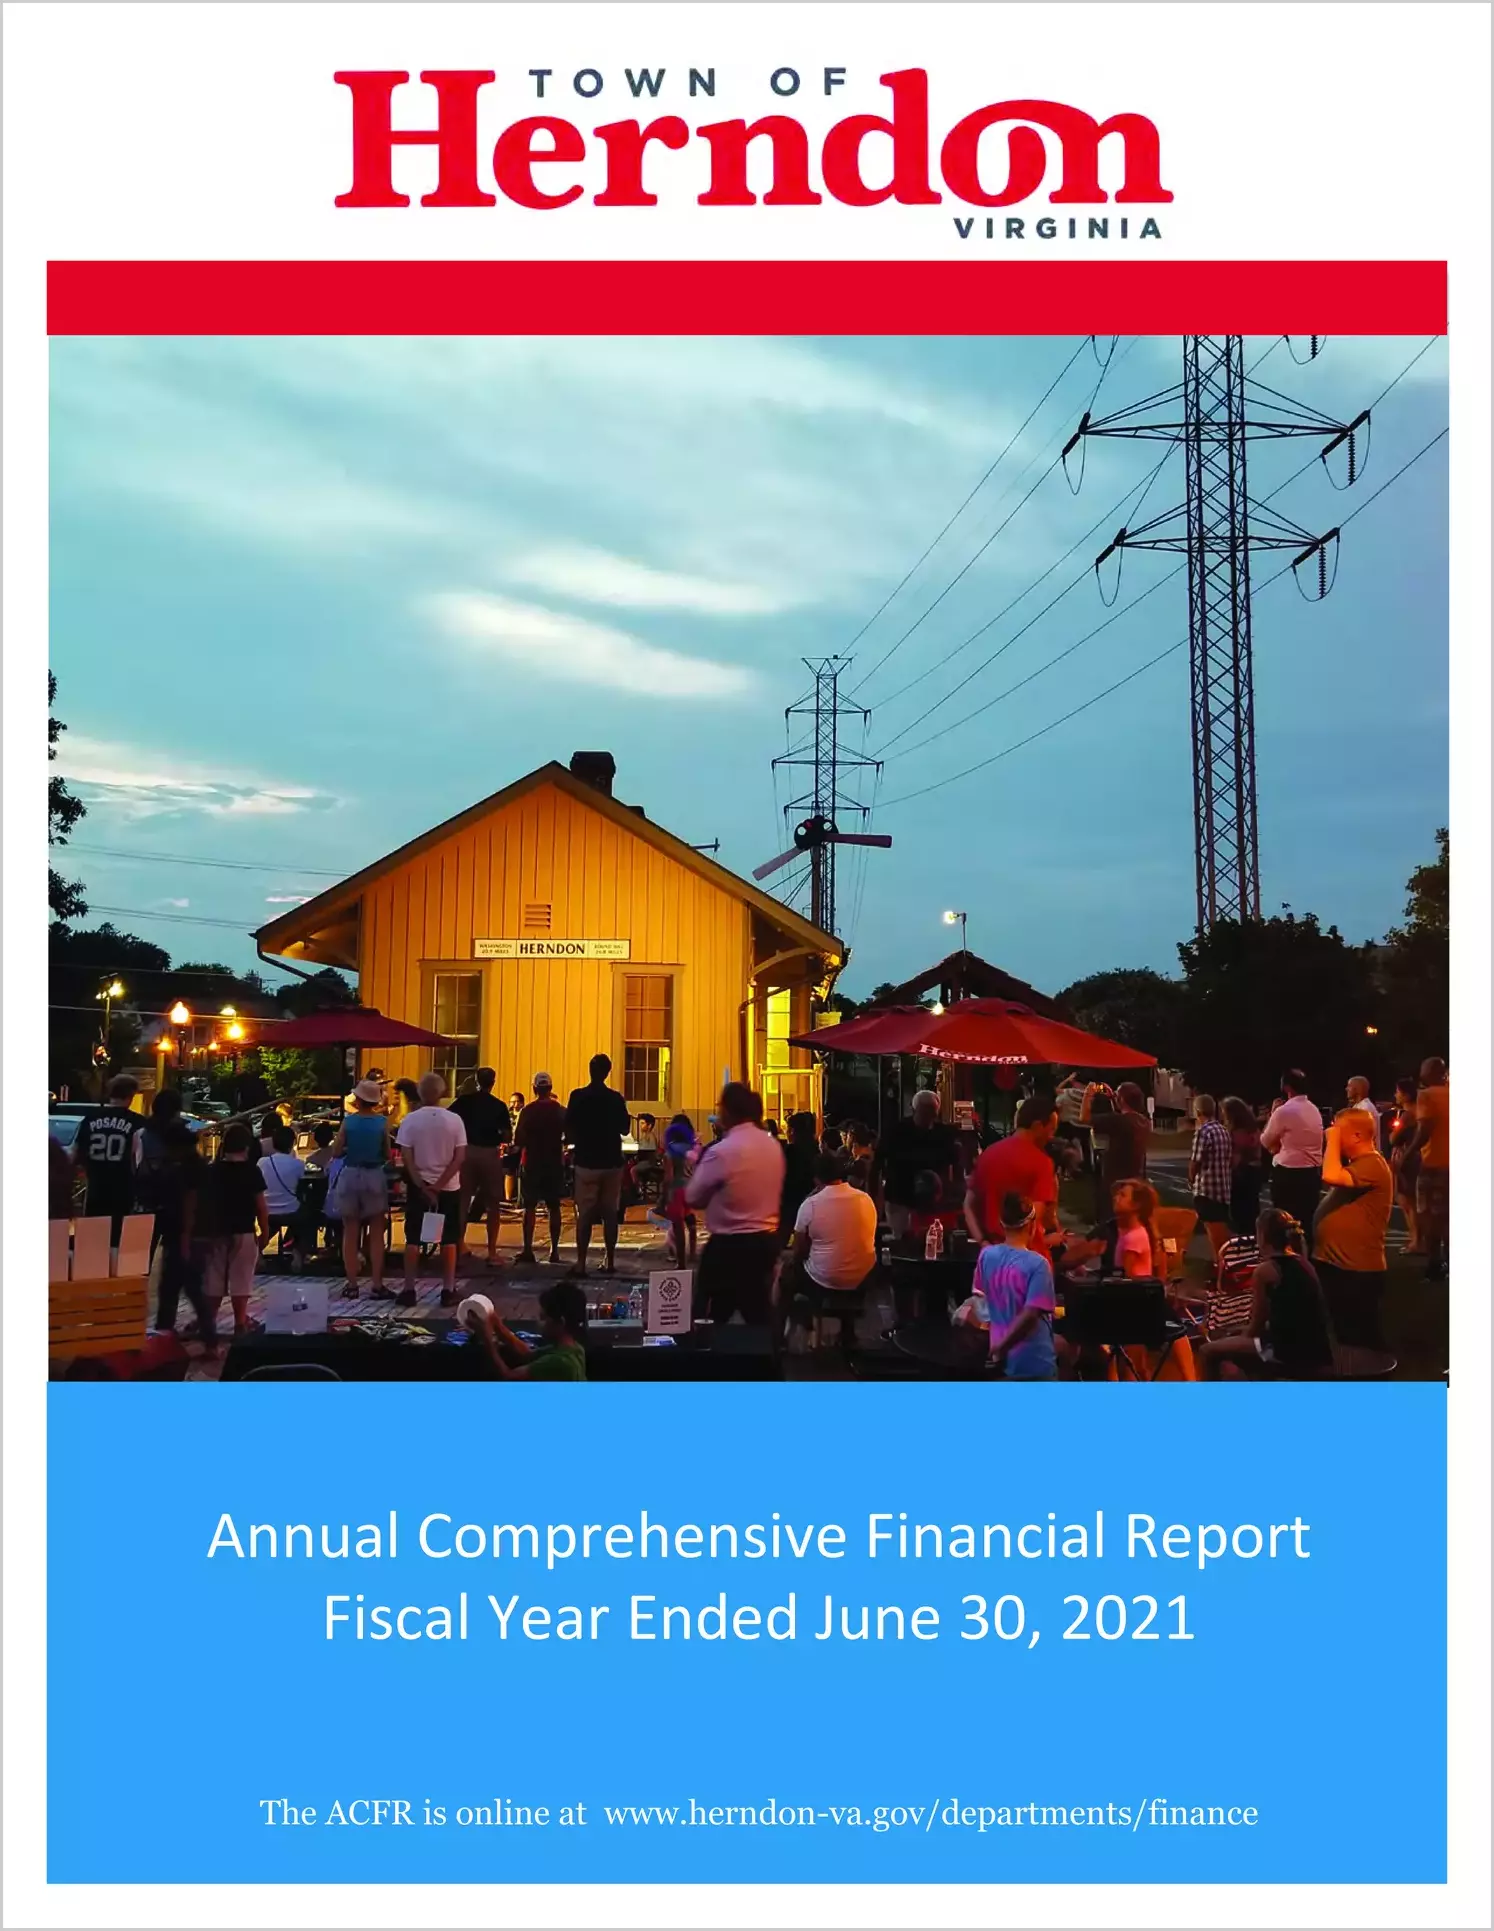 2021 Annual Financial Report for Town of Herndon